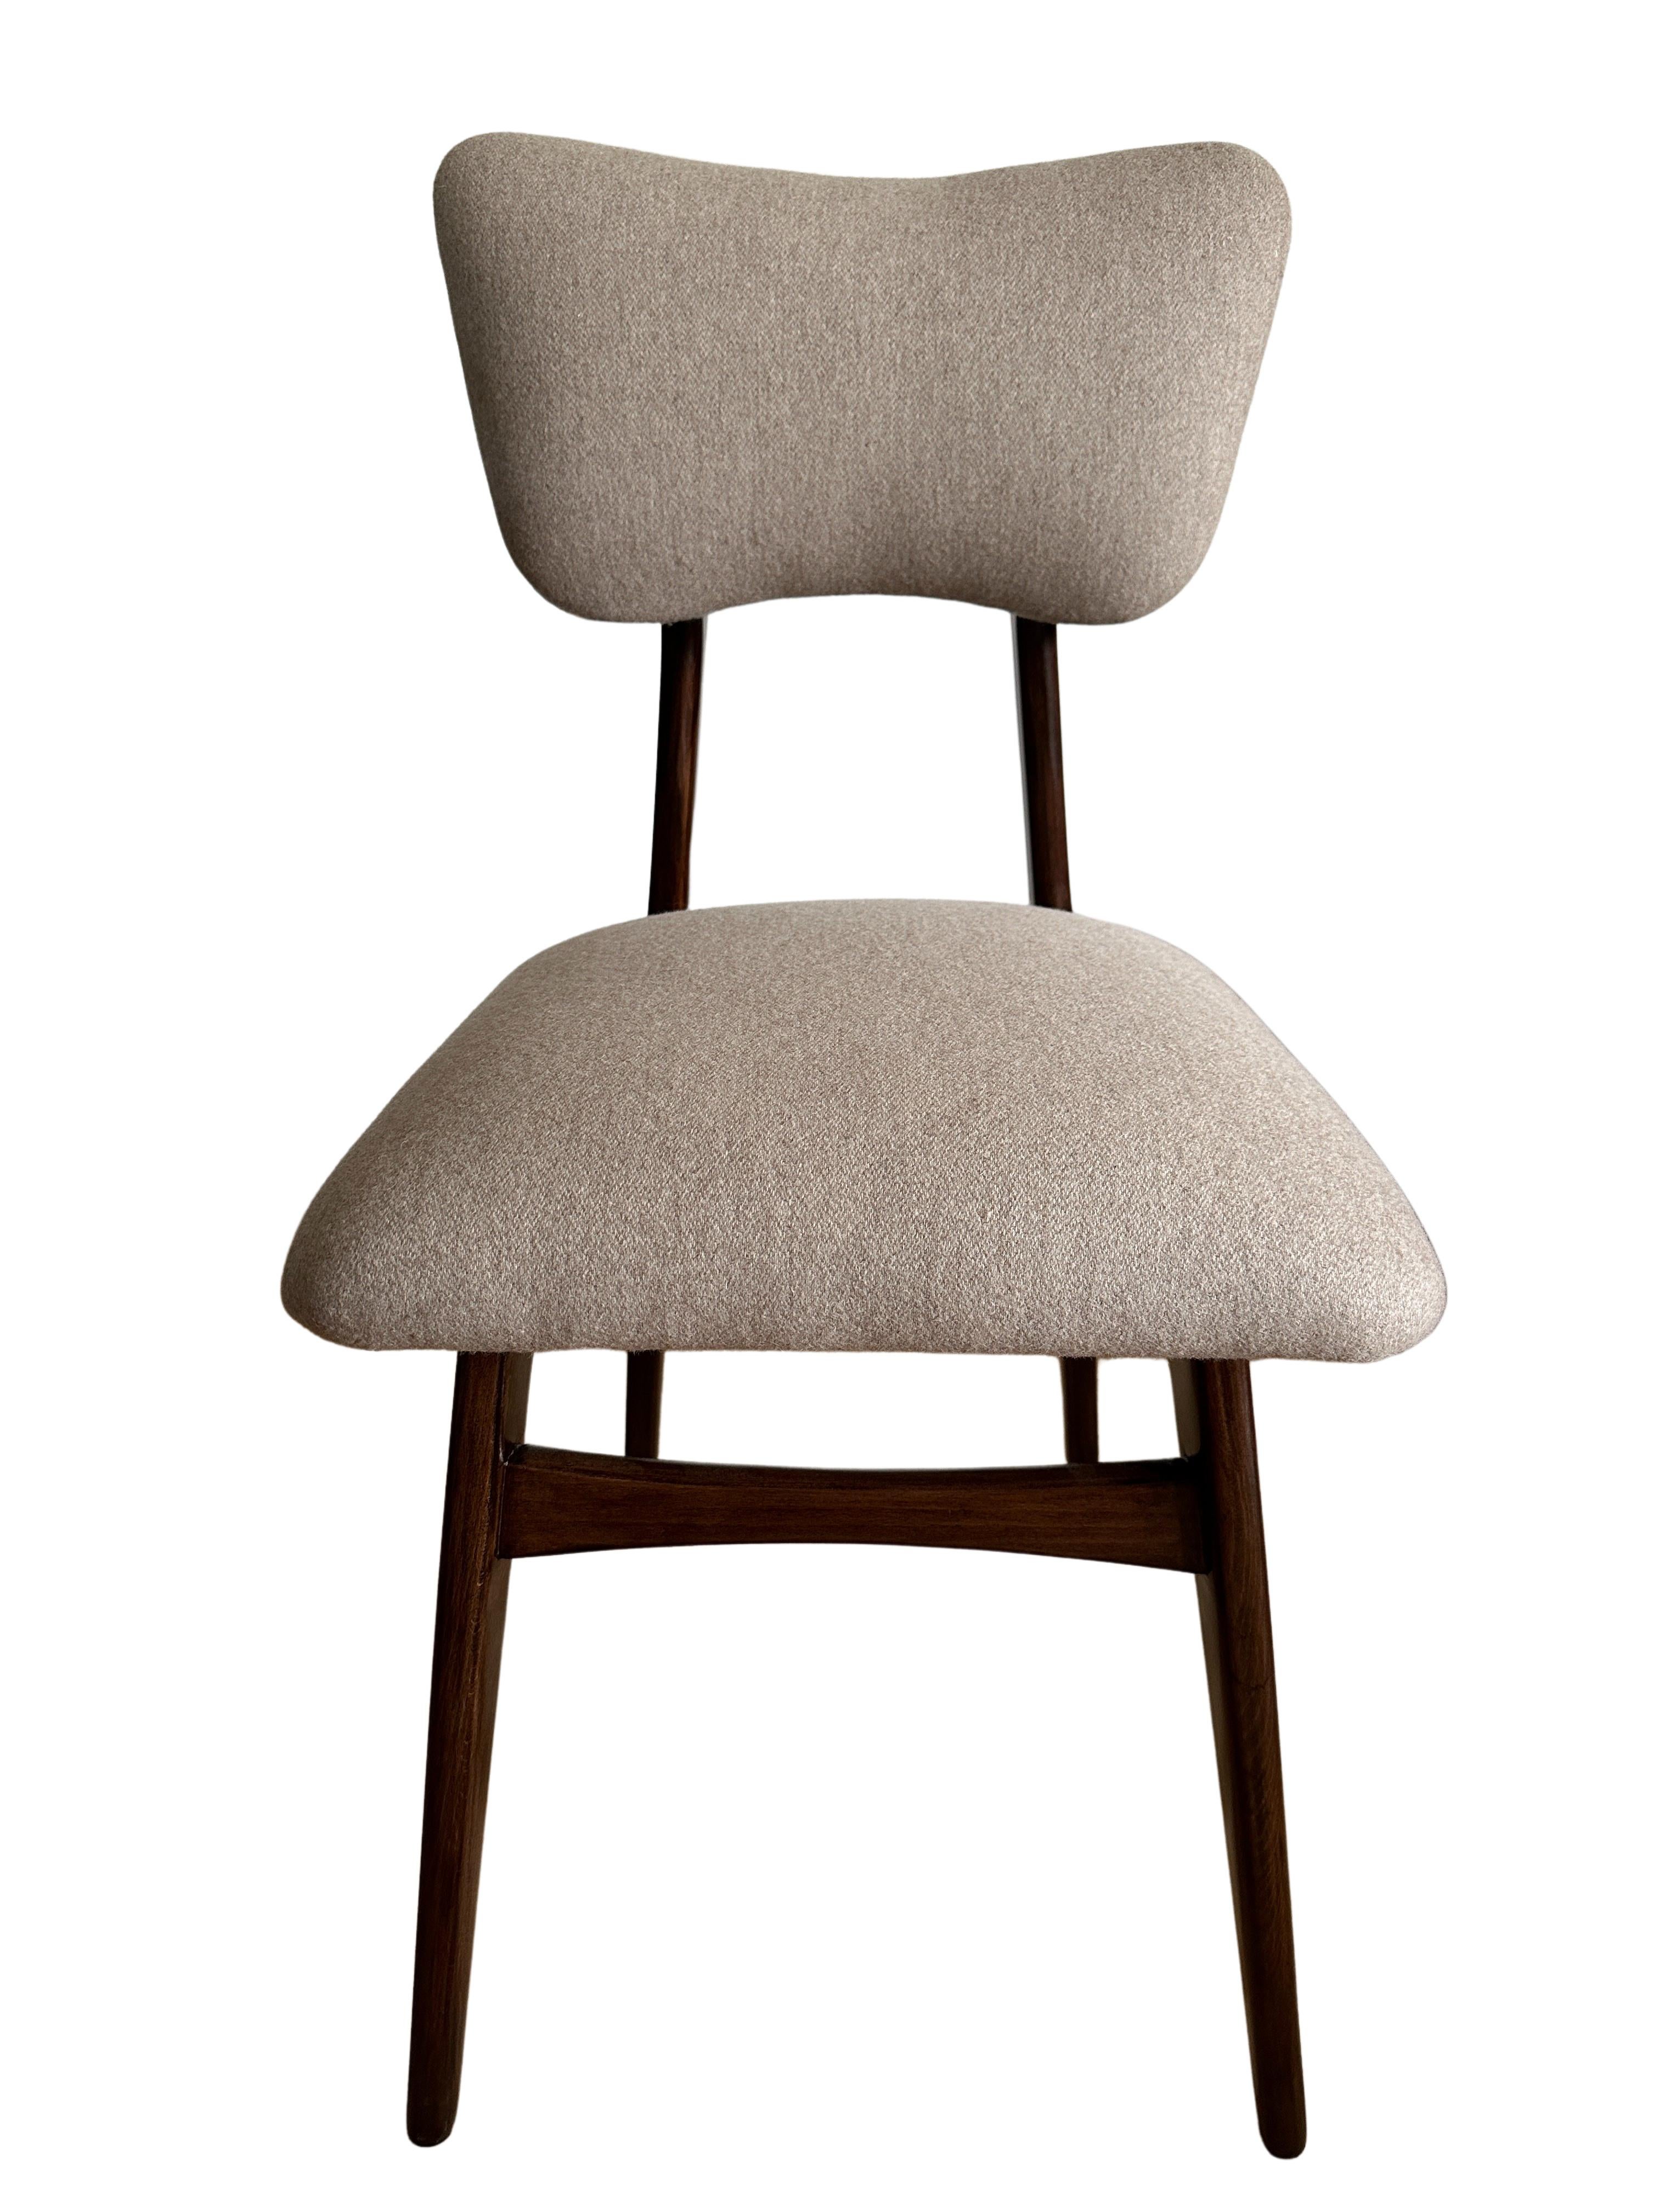 20th Century Set of 4 Midcentury Dining Chairs in Beige Wool Upholstery, Poland, 1960s For Sale